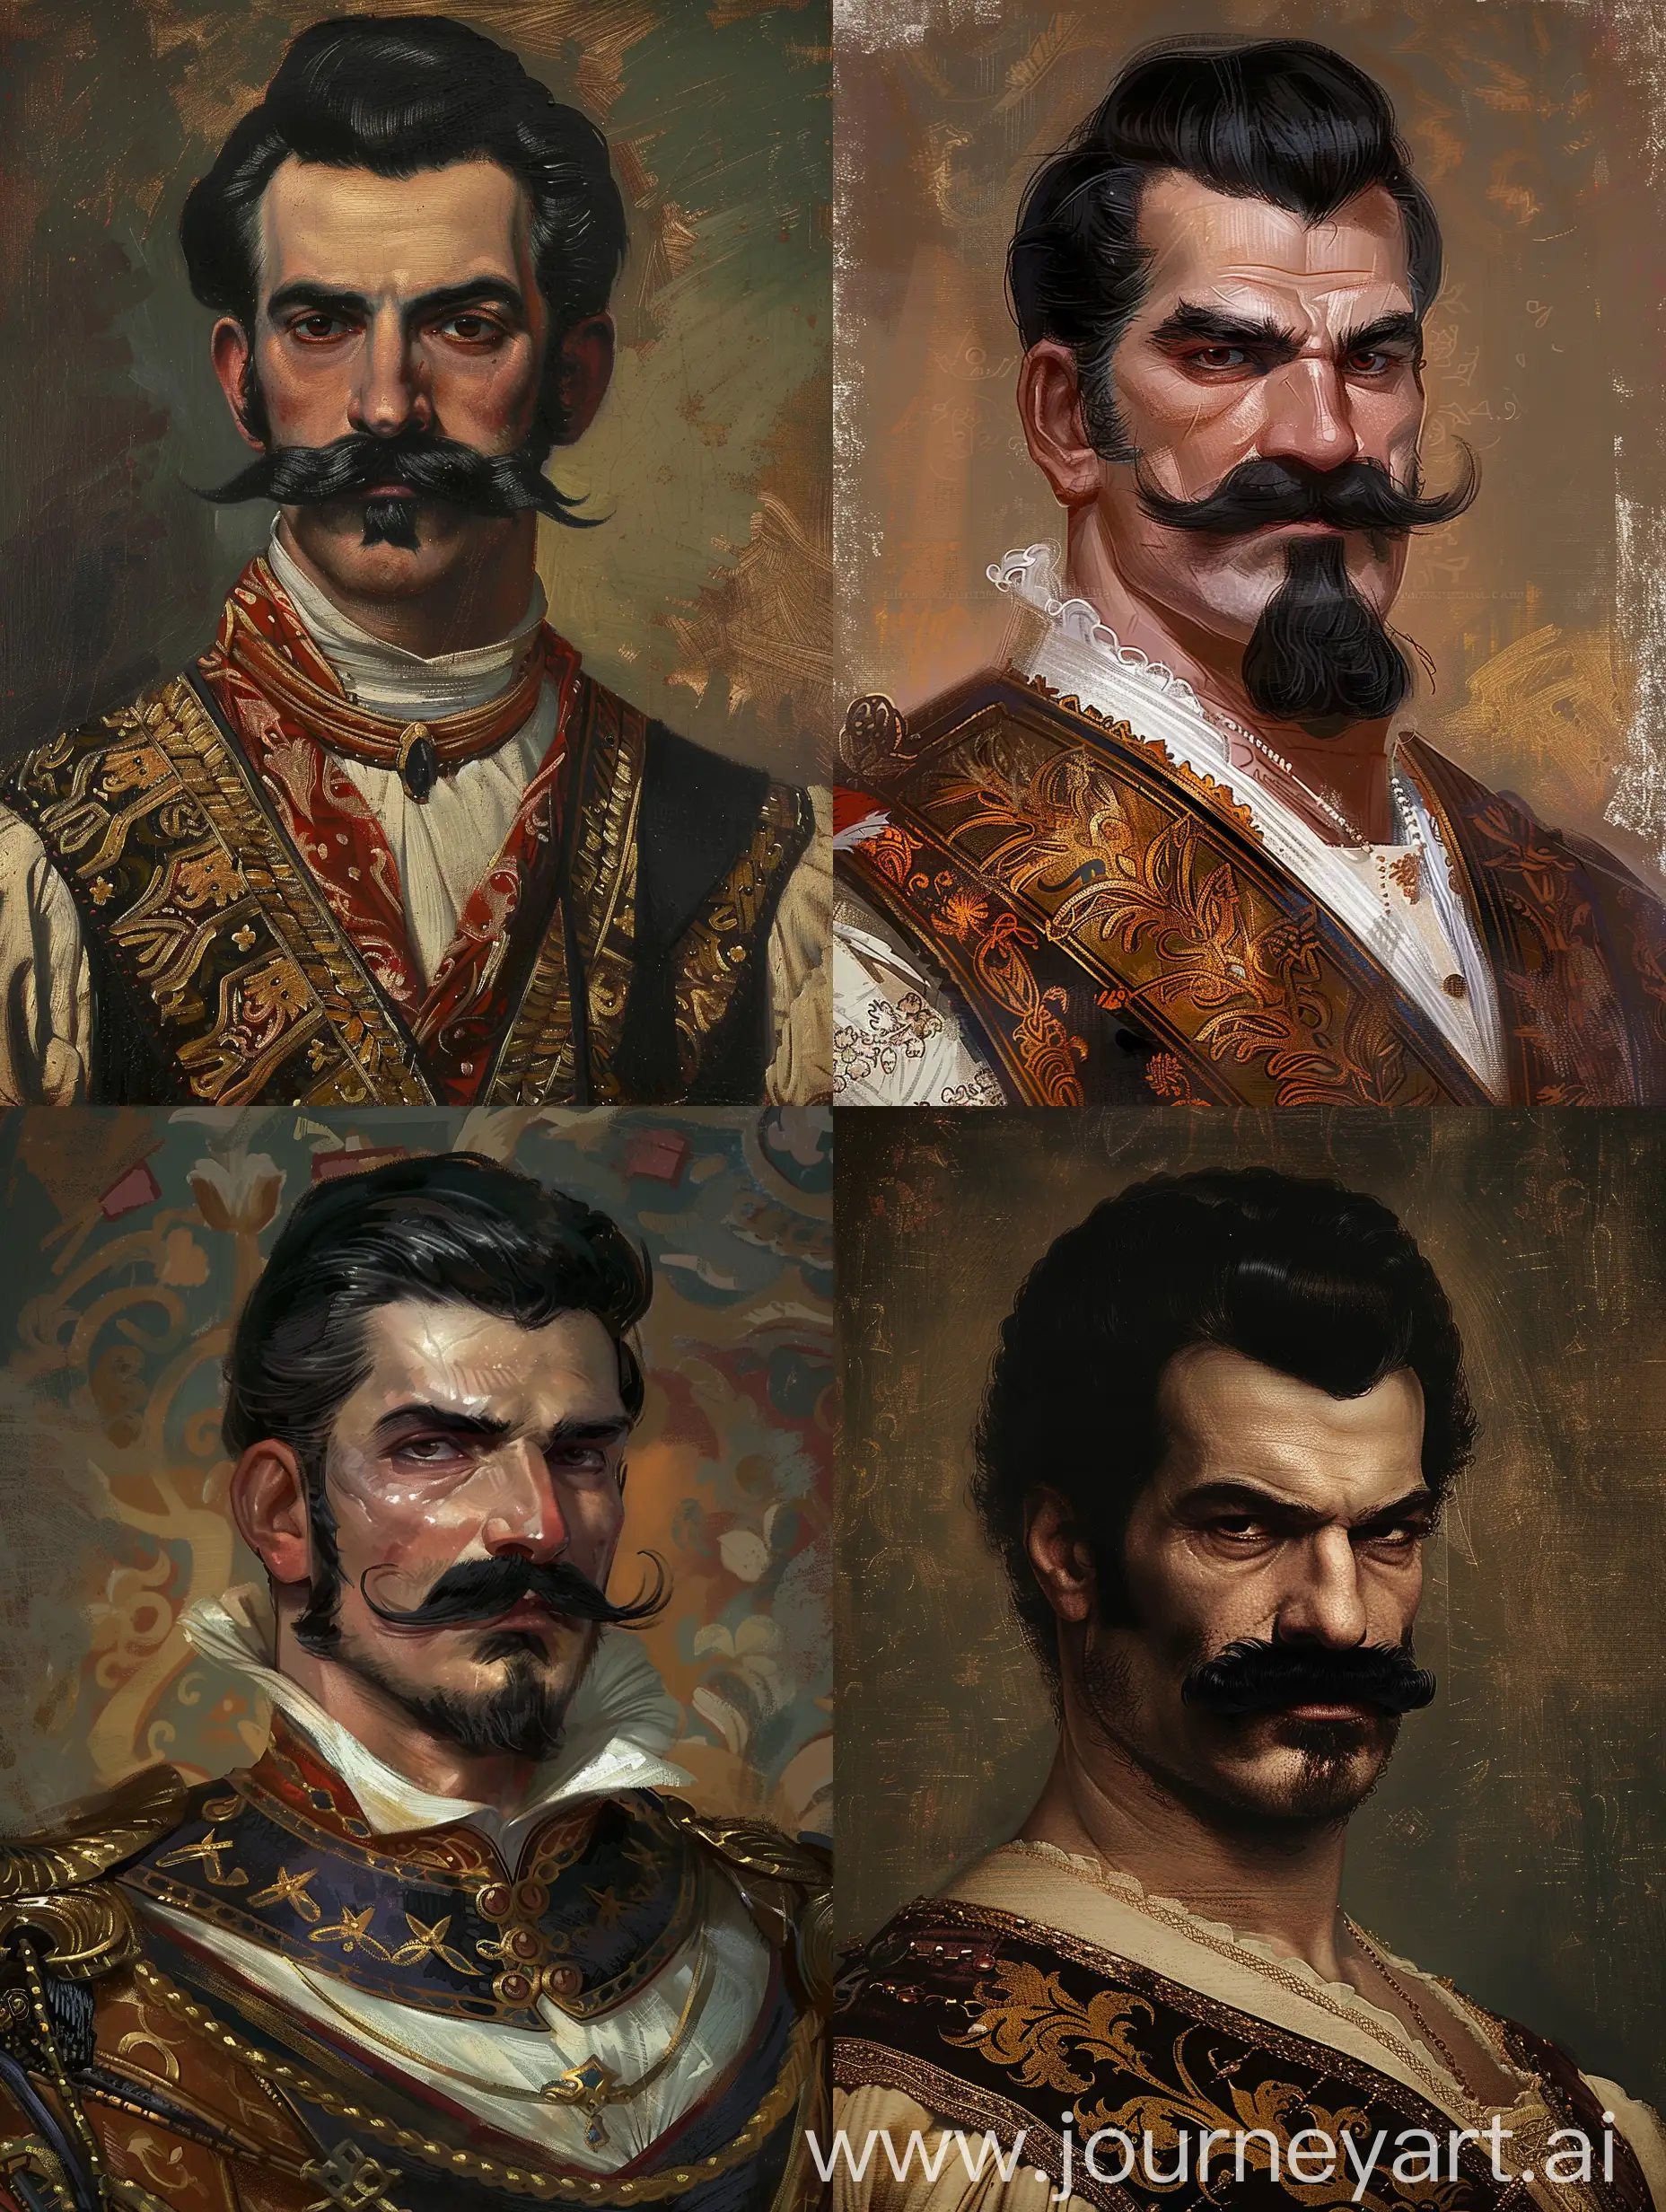 Create an image of a Greek Ottoman Pasha with distinct masculine features. He has black hair and a thick black mustache, with a prominent chin characteristic of the Dinarid type. The painting should be in the Renaissance style, reminiscent of the works of Leonardo da Vinci, capturing the grandeur and detail typical of that era. The Pasha is adorned in traditional Ottoman attire, with rich fabrics and intricate designs that reflect his high status. The background should be classic and elegant, complementing the overall regal and historical aesthetic of the portrait.